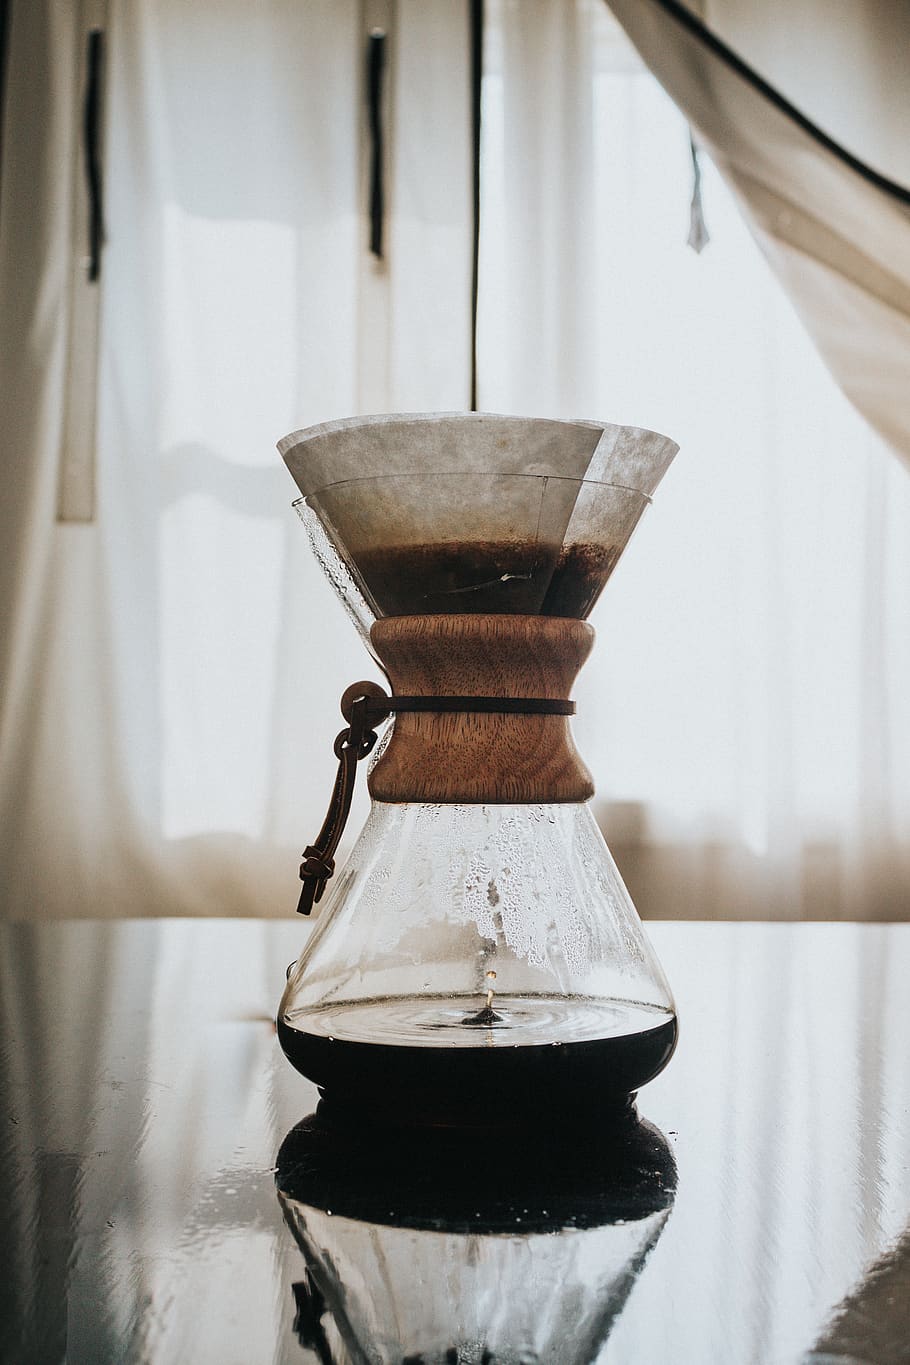 coffee, chemex, pourover, love, nature, morning, light, business